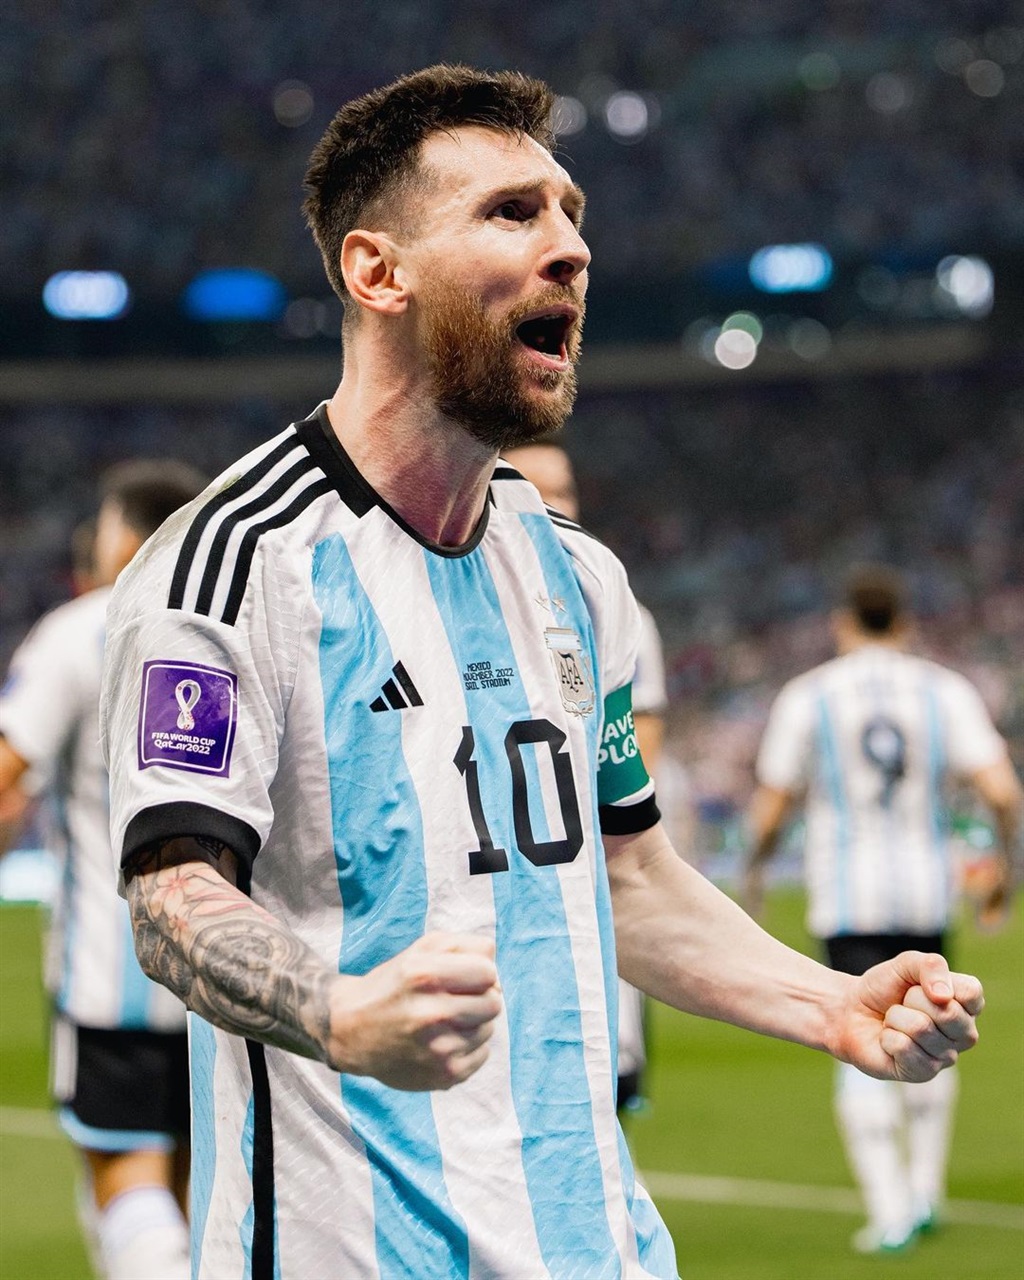 Messi's Jersey Sales Peaked At R10k On Re-Sale Site